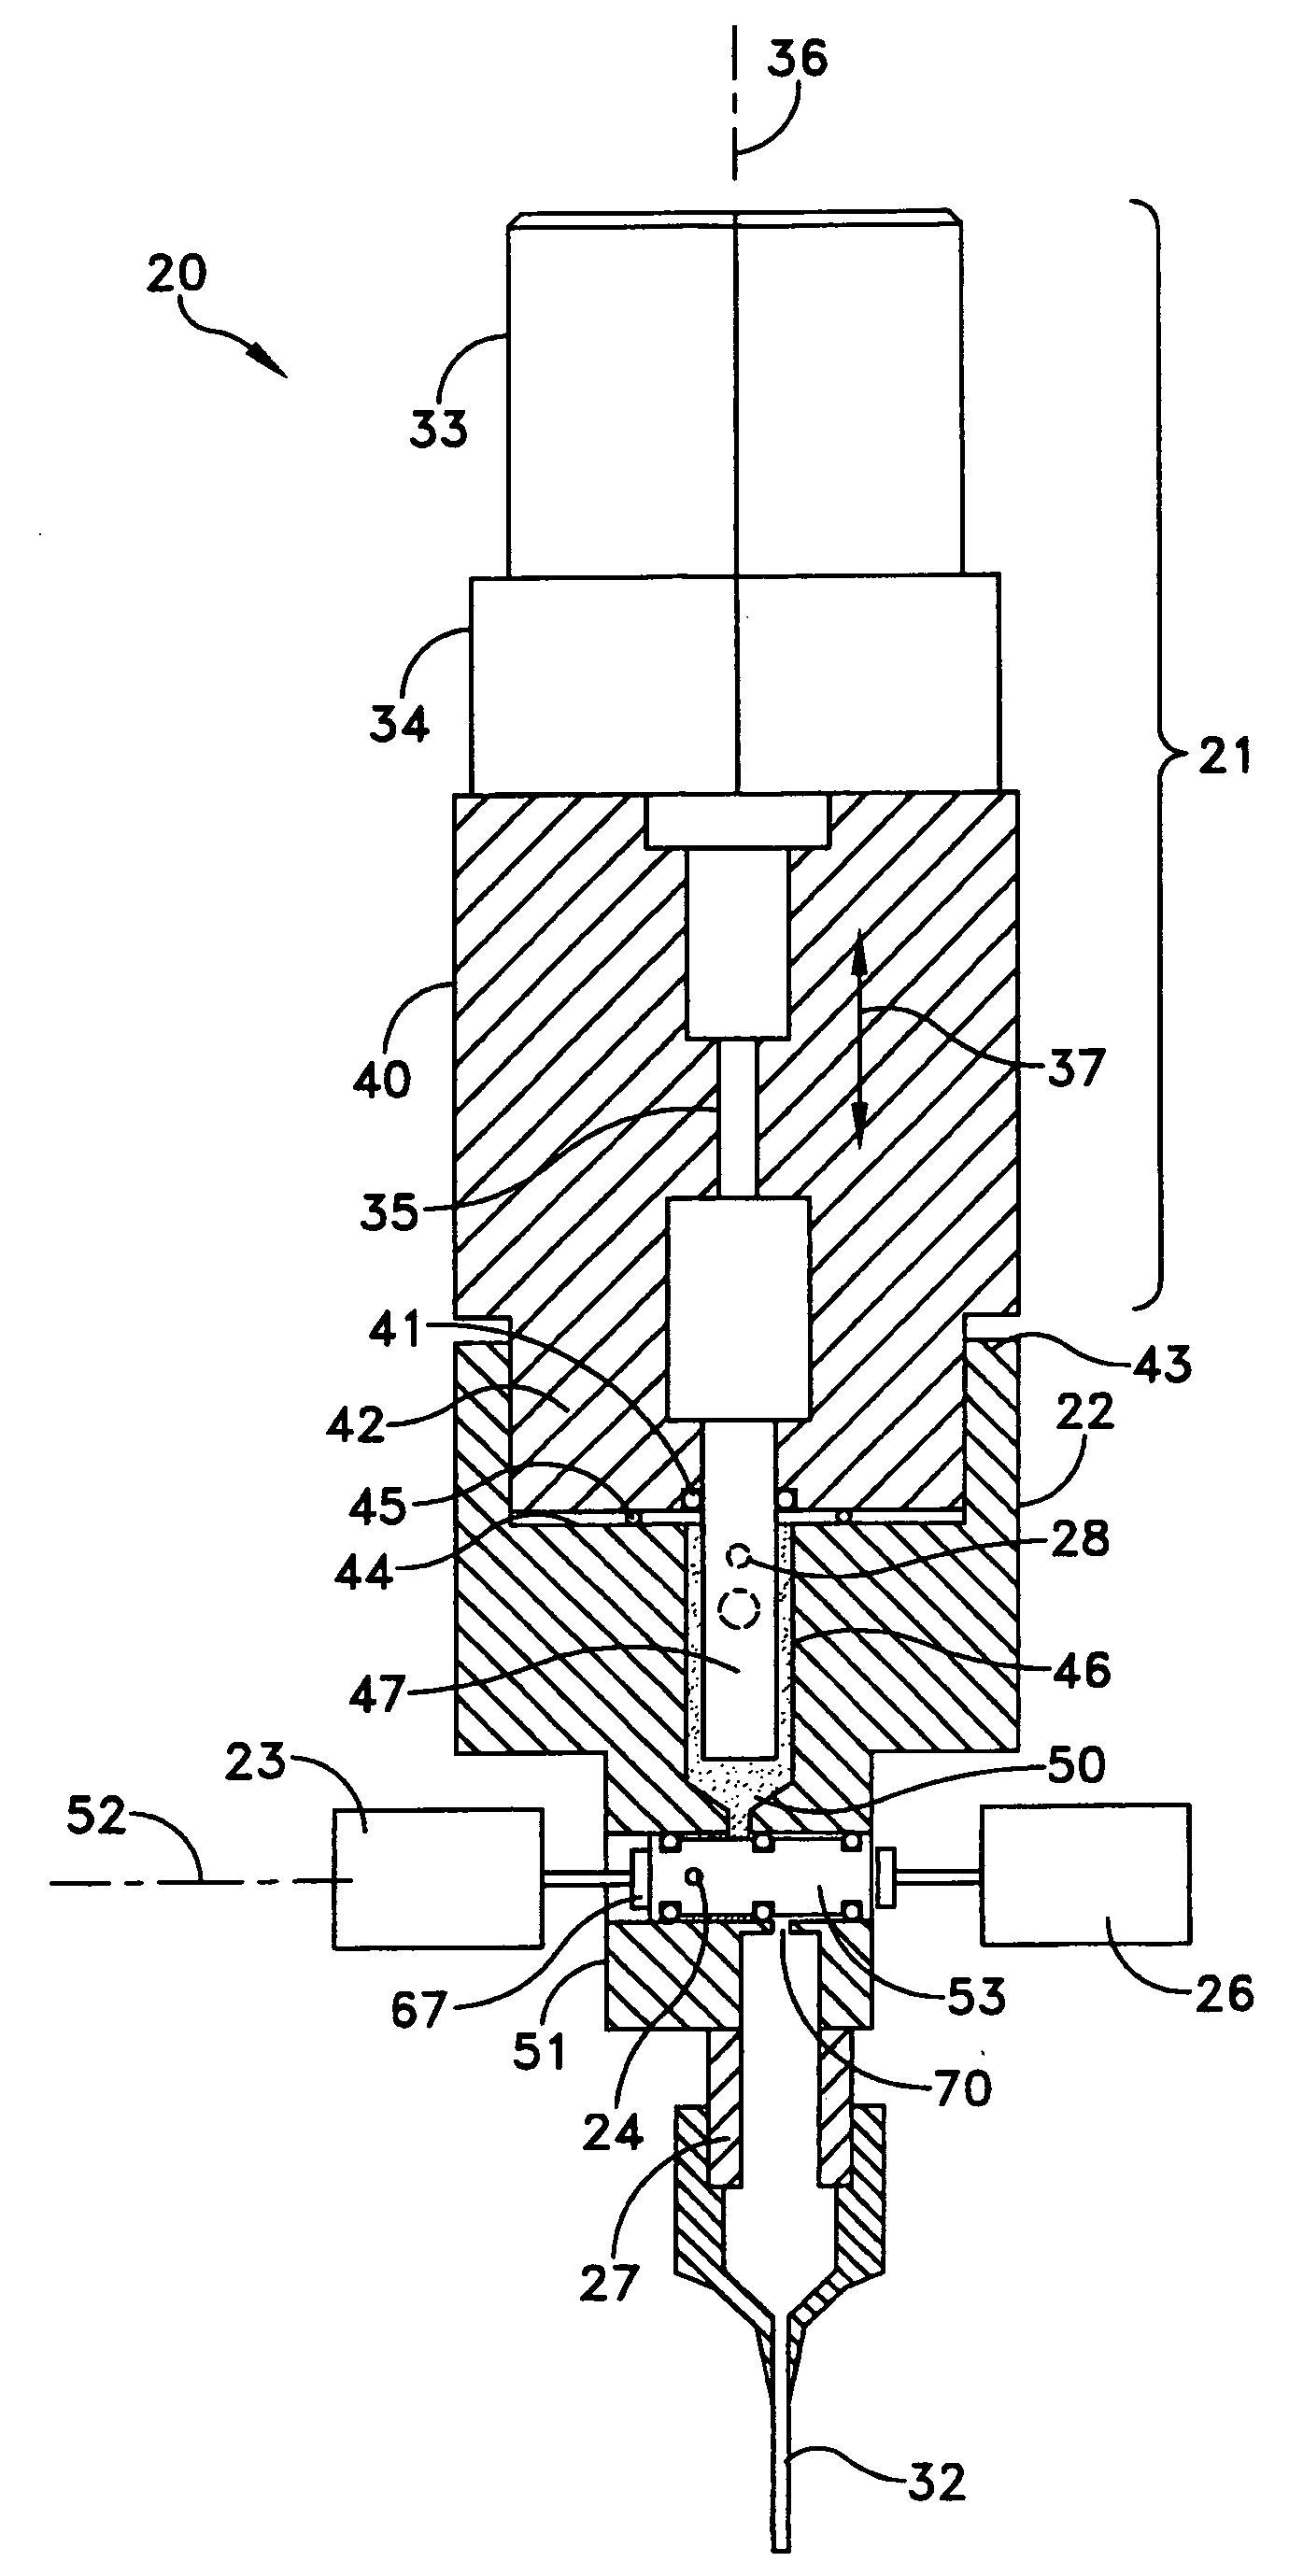 Apparatus for dispensing precise amounts of a non-compressible fluid